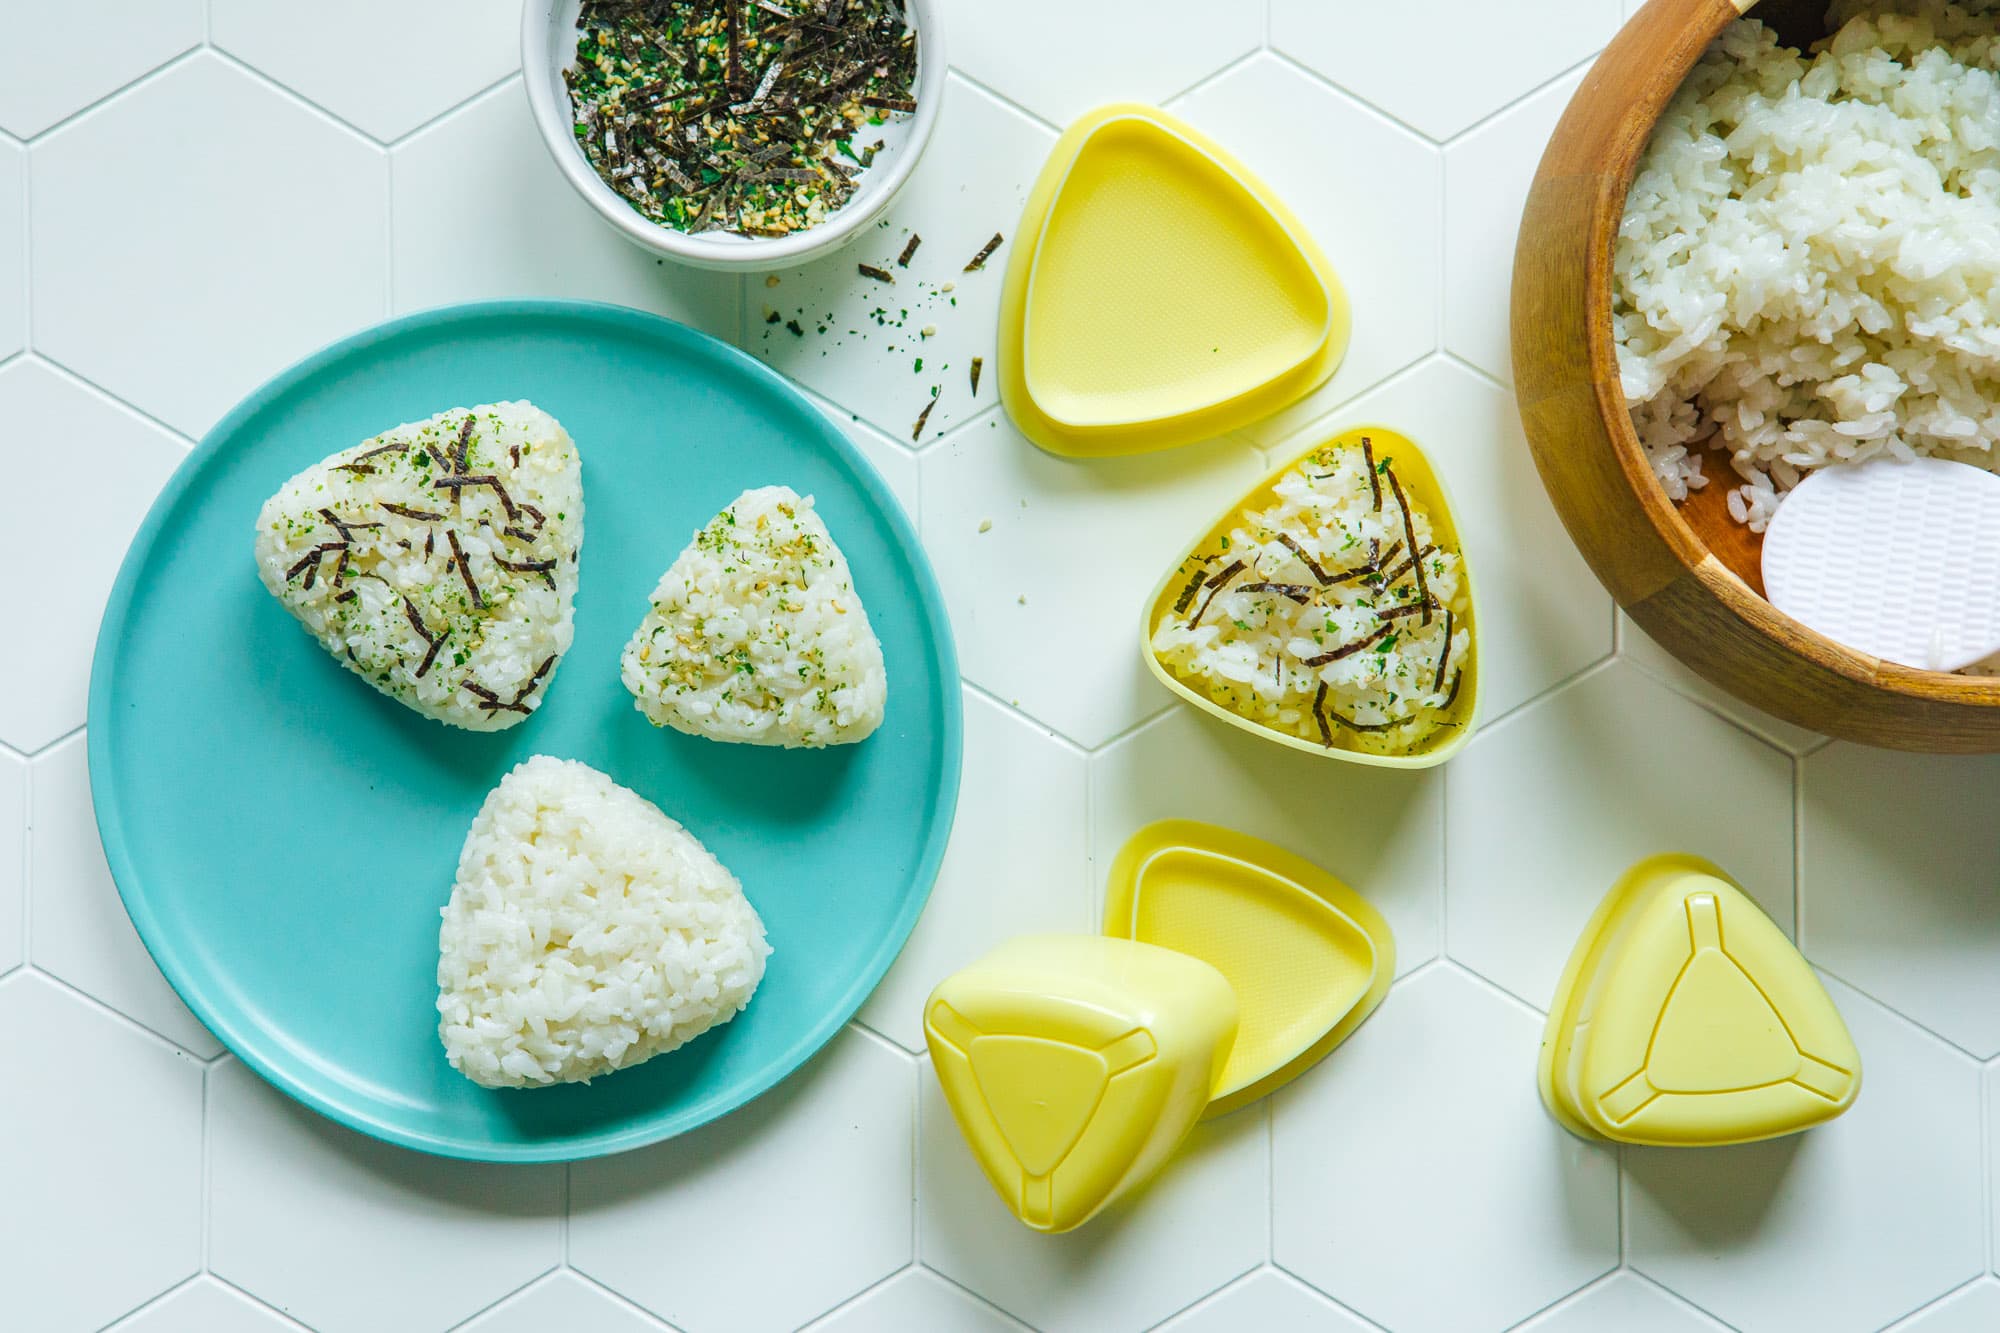 https://cdn.apartmenttherapy.info/image/upload/v1616858329/k/Photo/Lifestyle/2021-04-Why-My-Onigiri-Molds-Are-One-of-The-Few-Gadgets-I%E2%80%99ll-Make-Room-For/Kitchn-2021-Onigiri-2.jpg